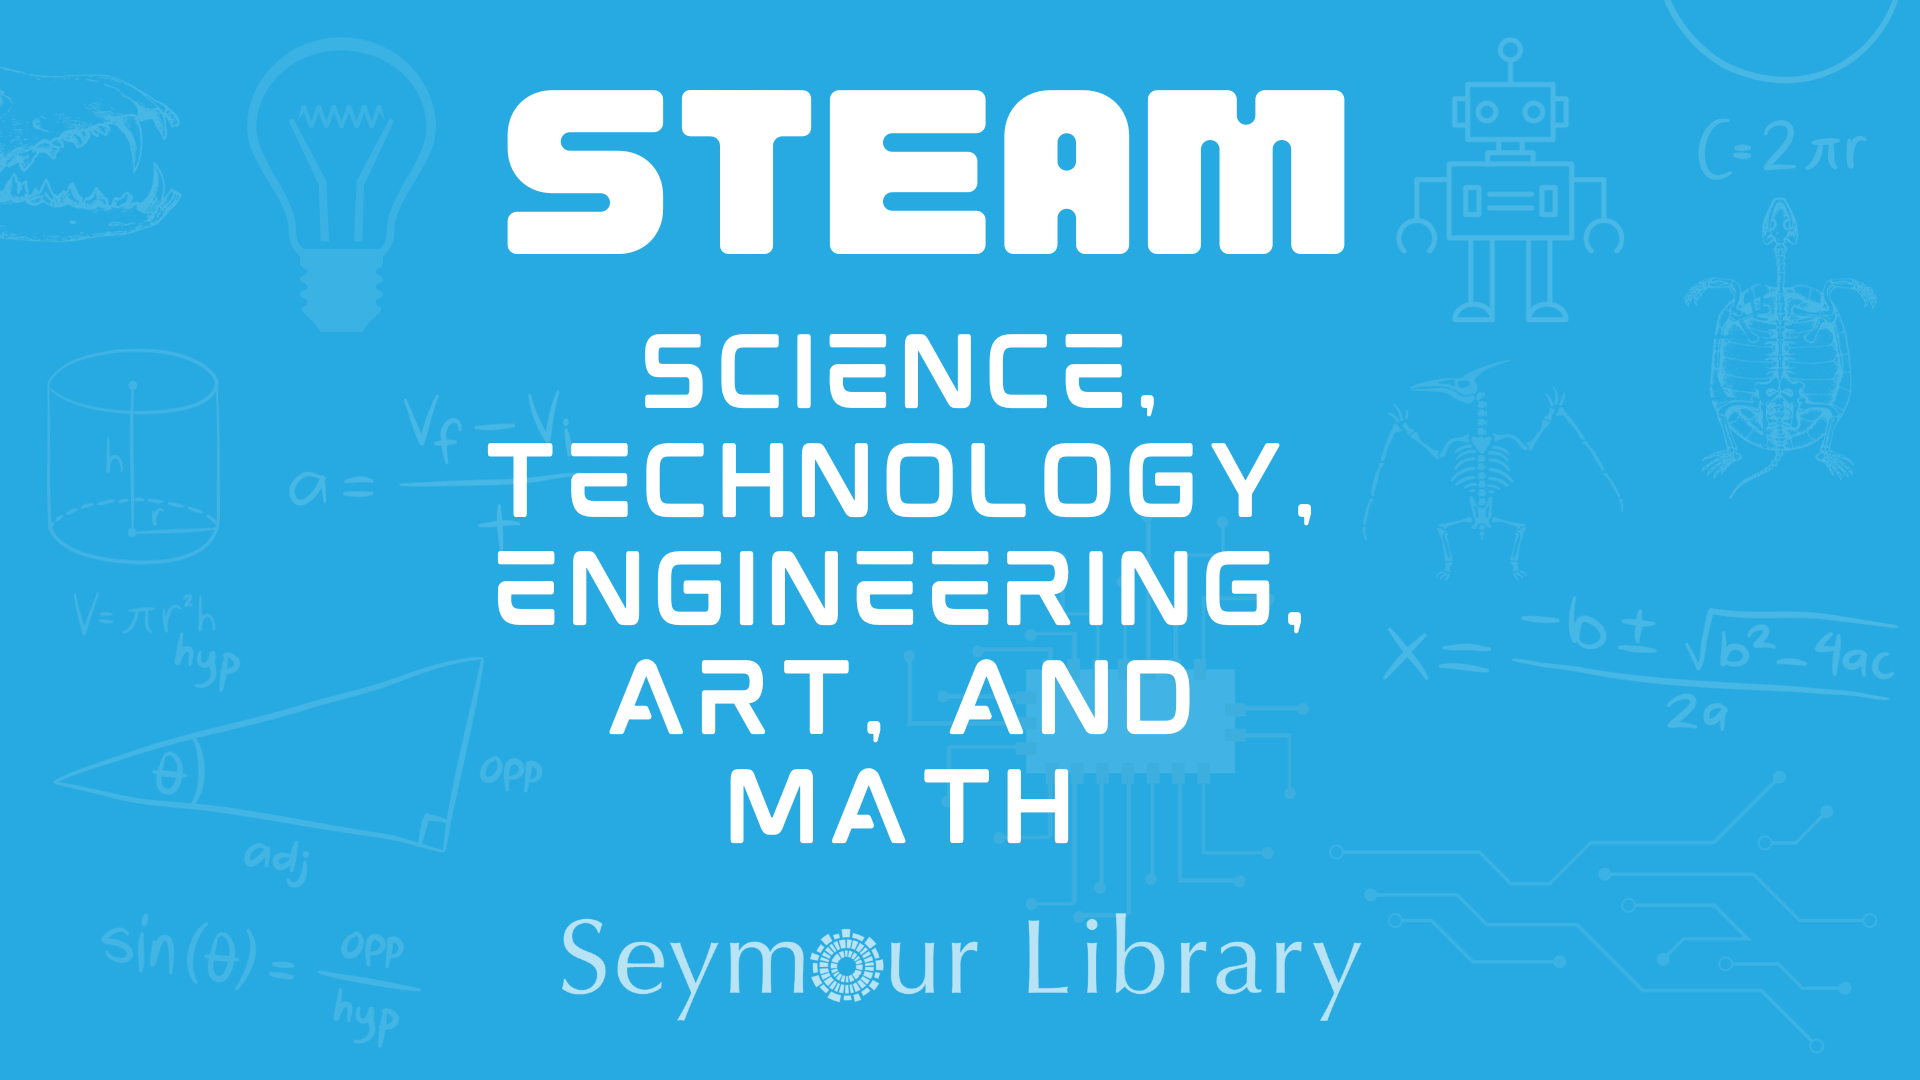 STEAM - Science, Technology, Engineering, Art, and Math.